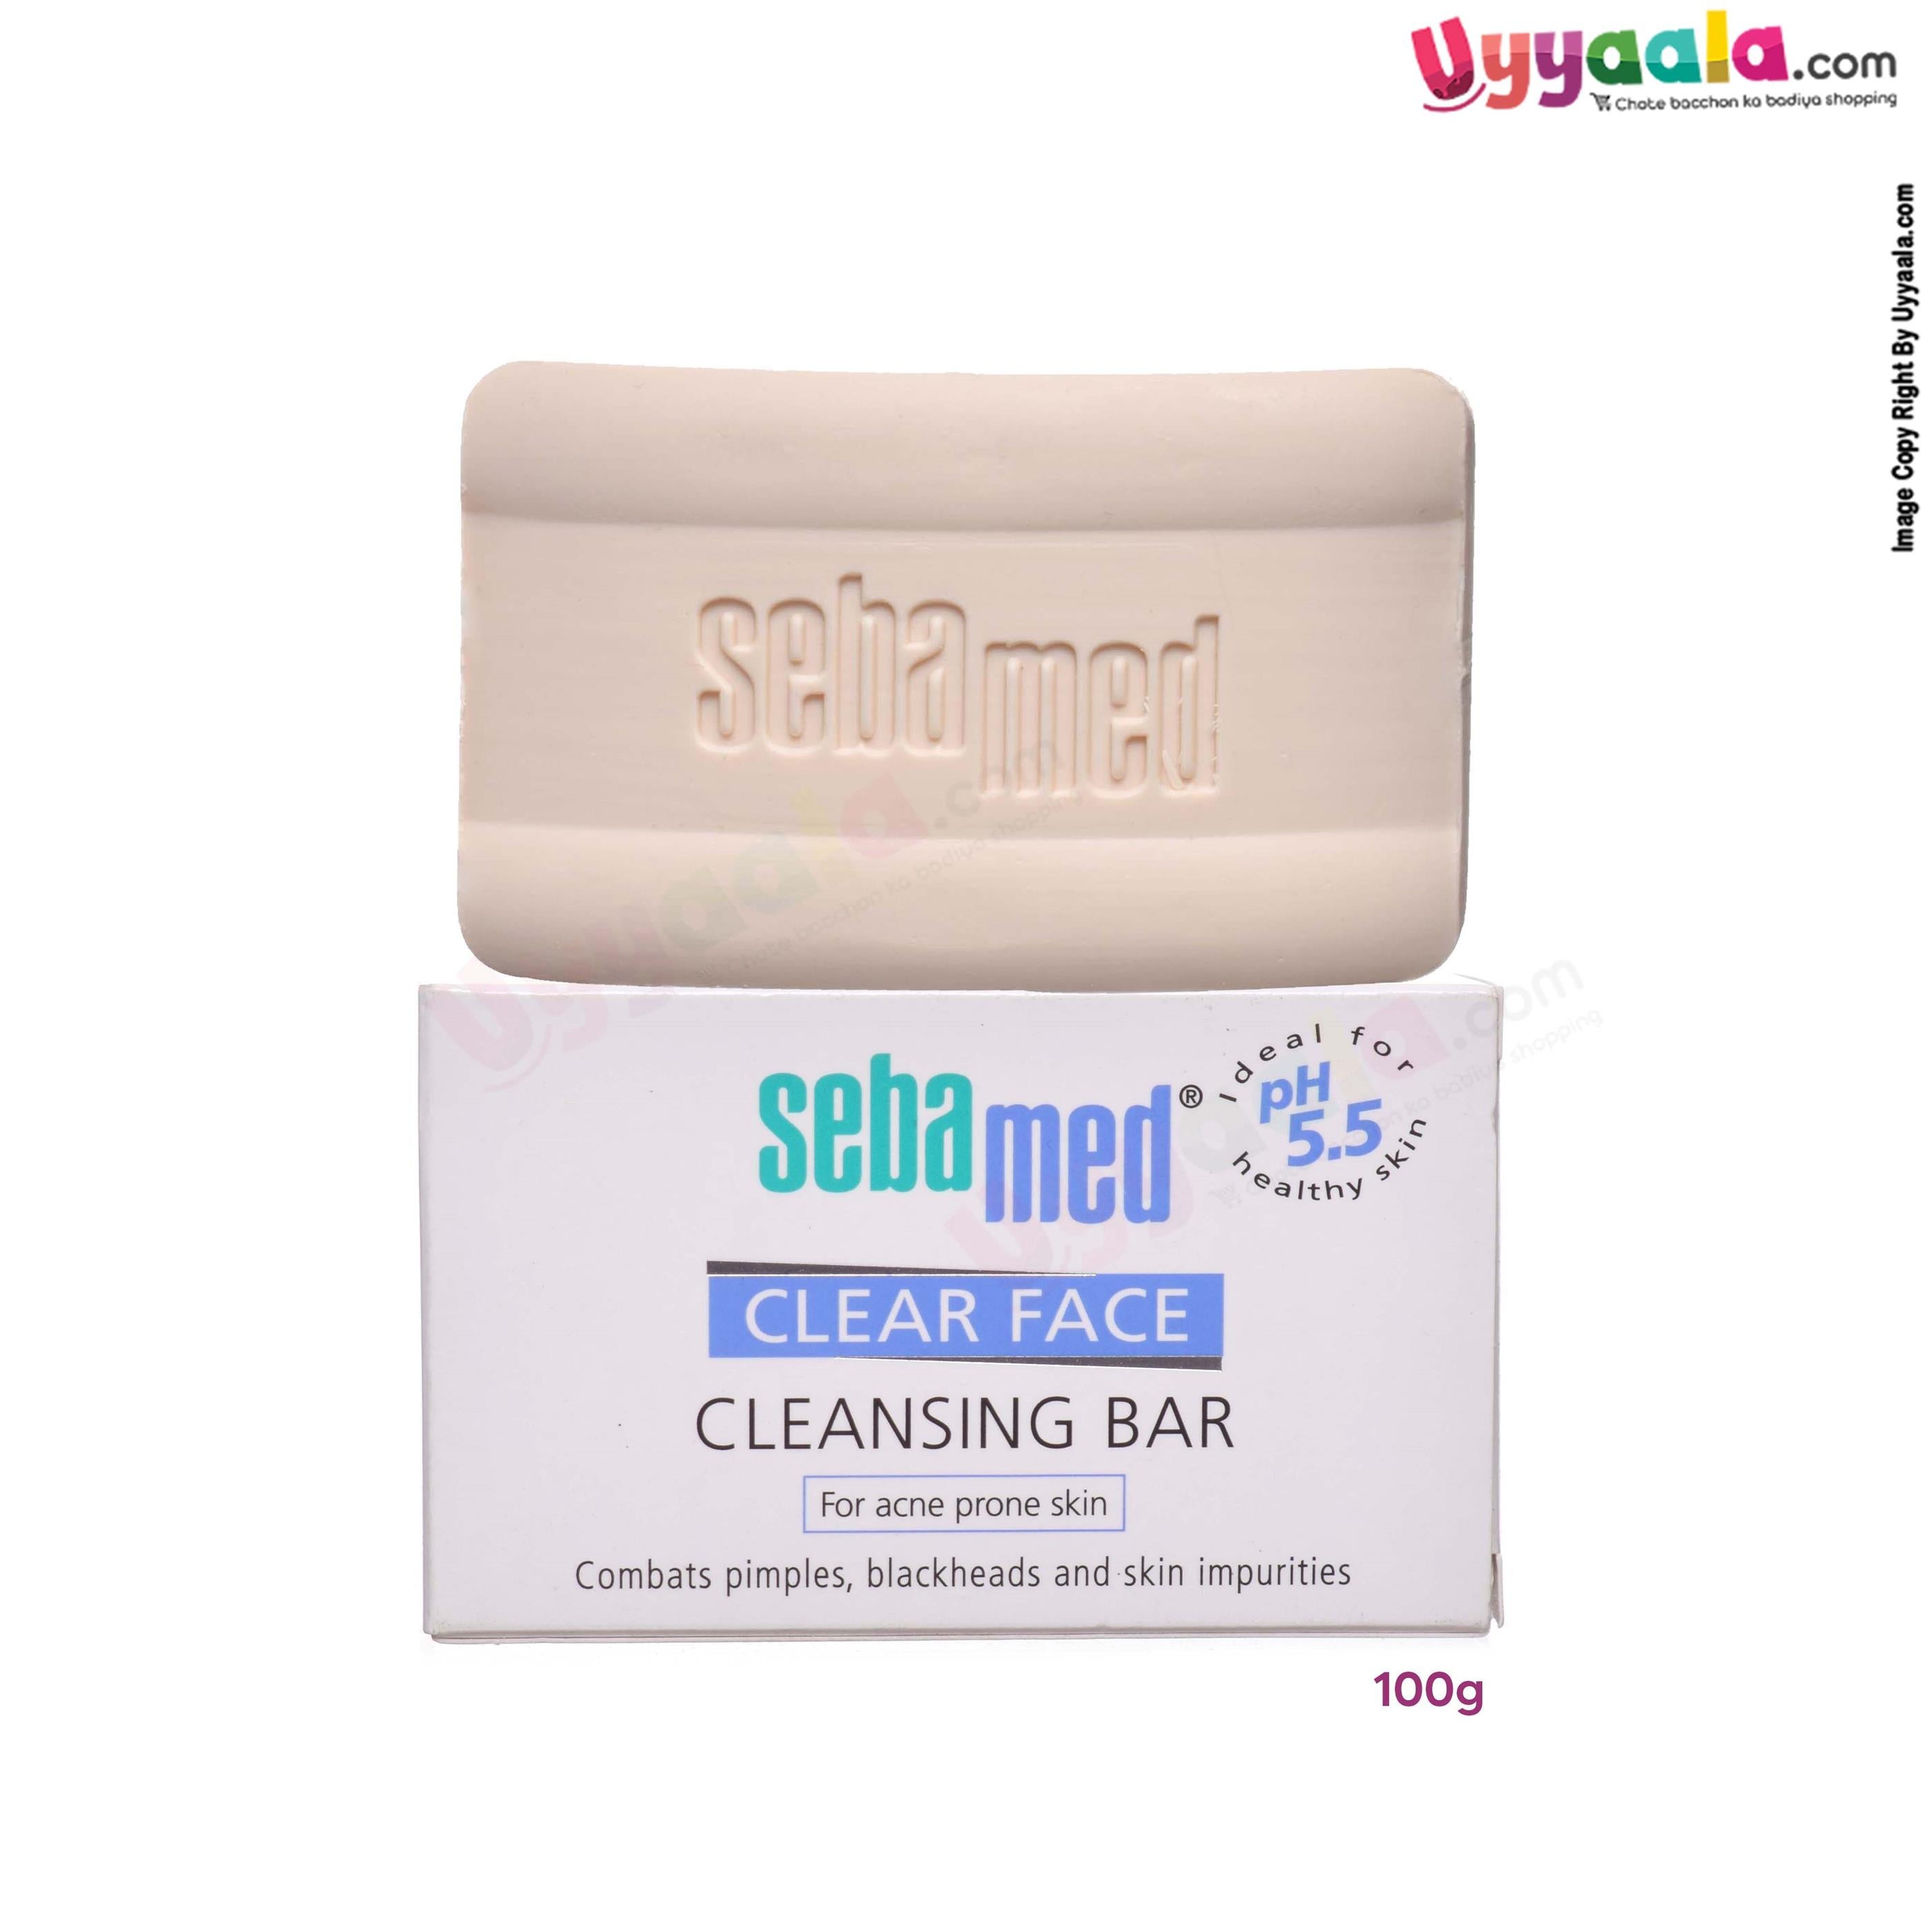 SEBAMED Clear face cleansing bar for adults